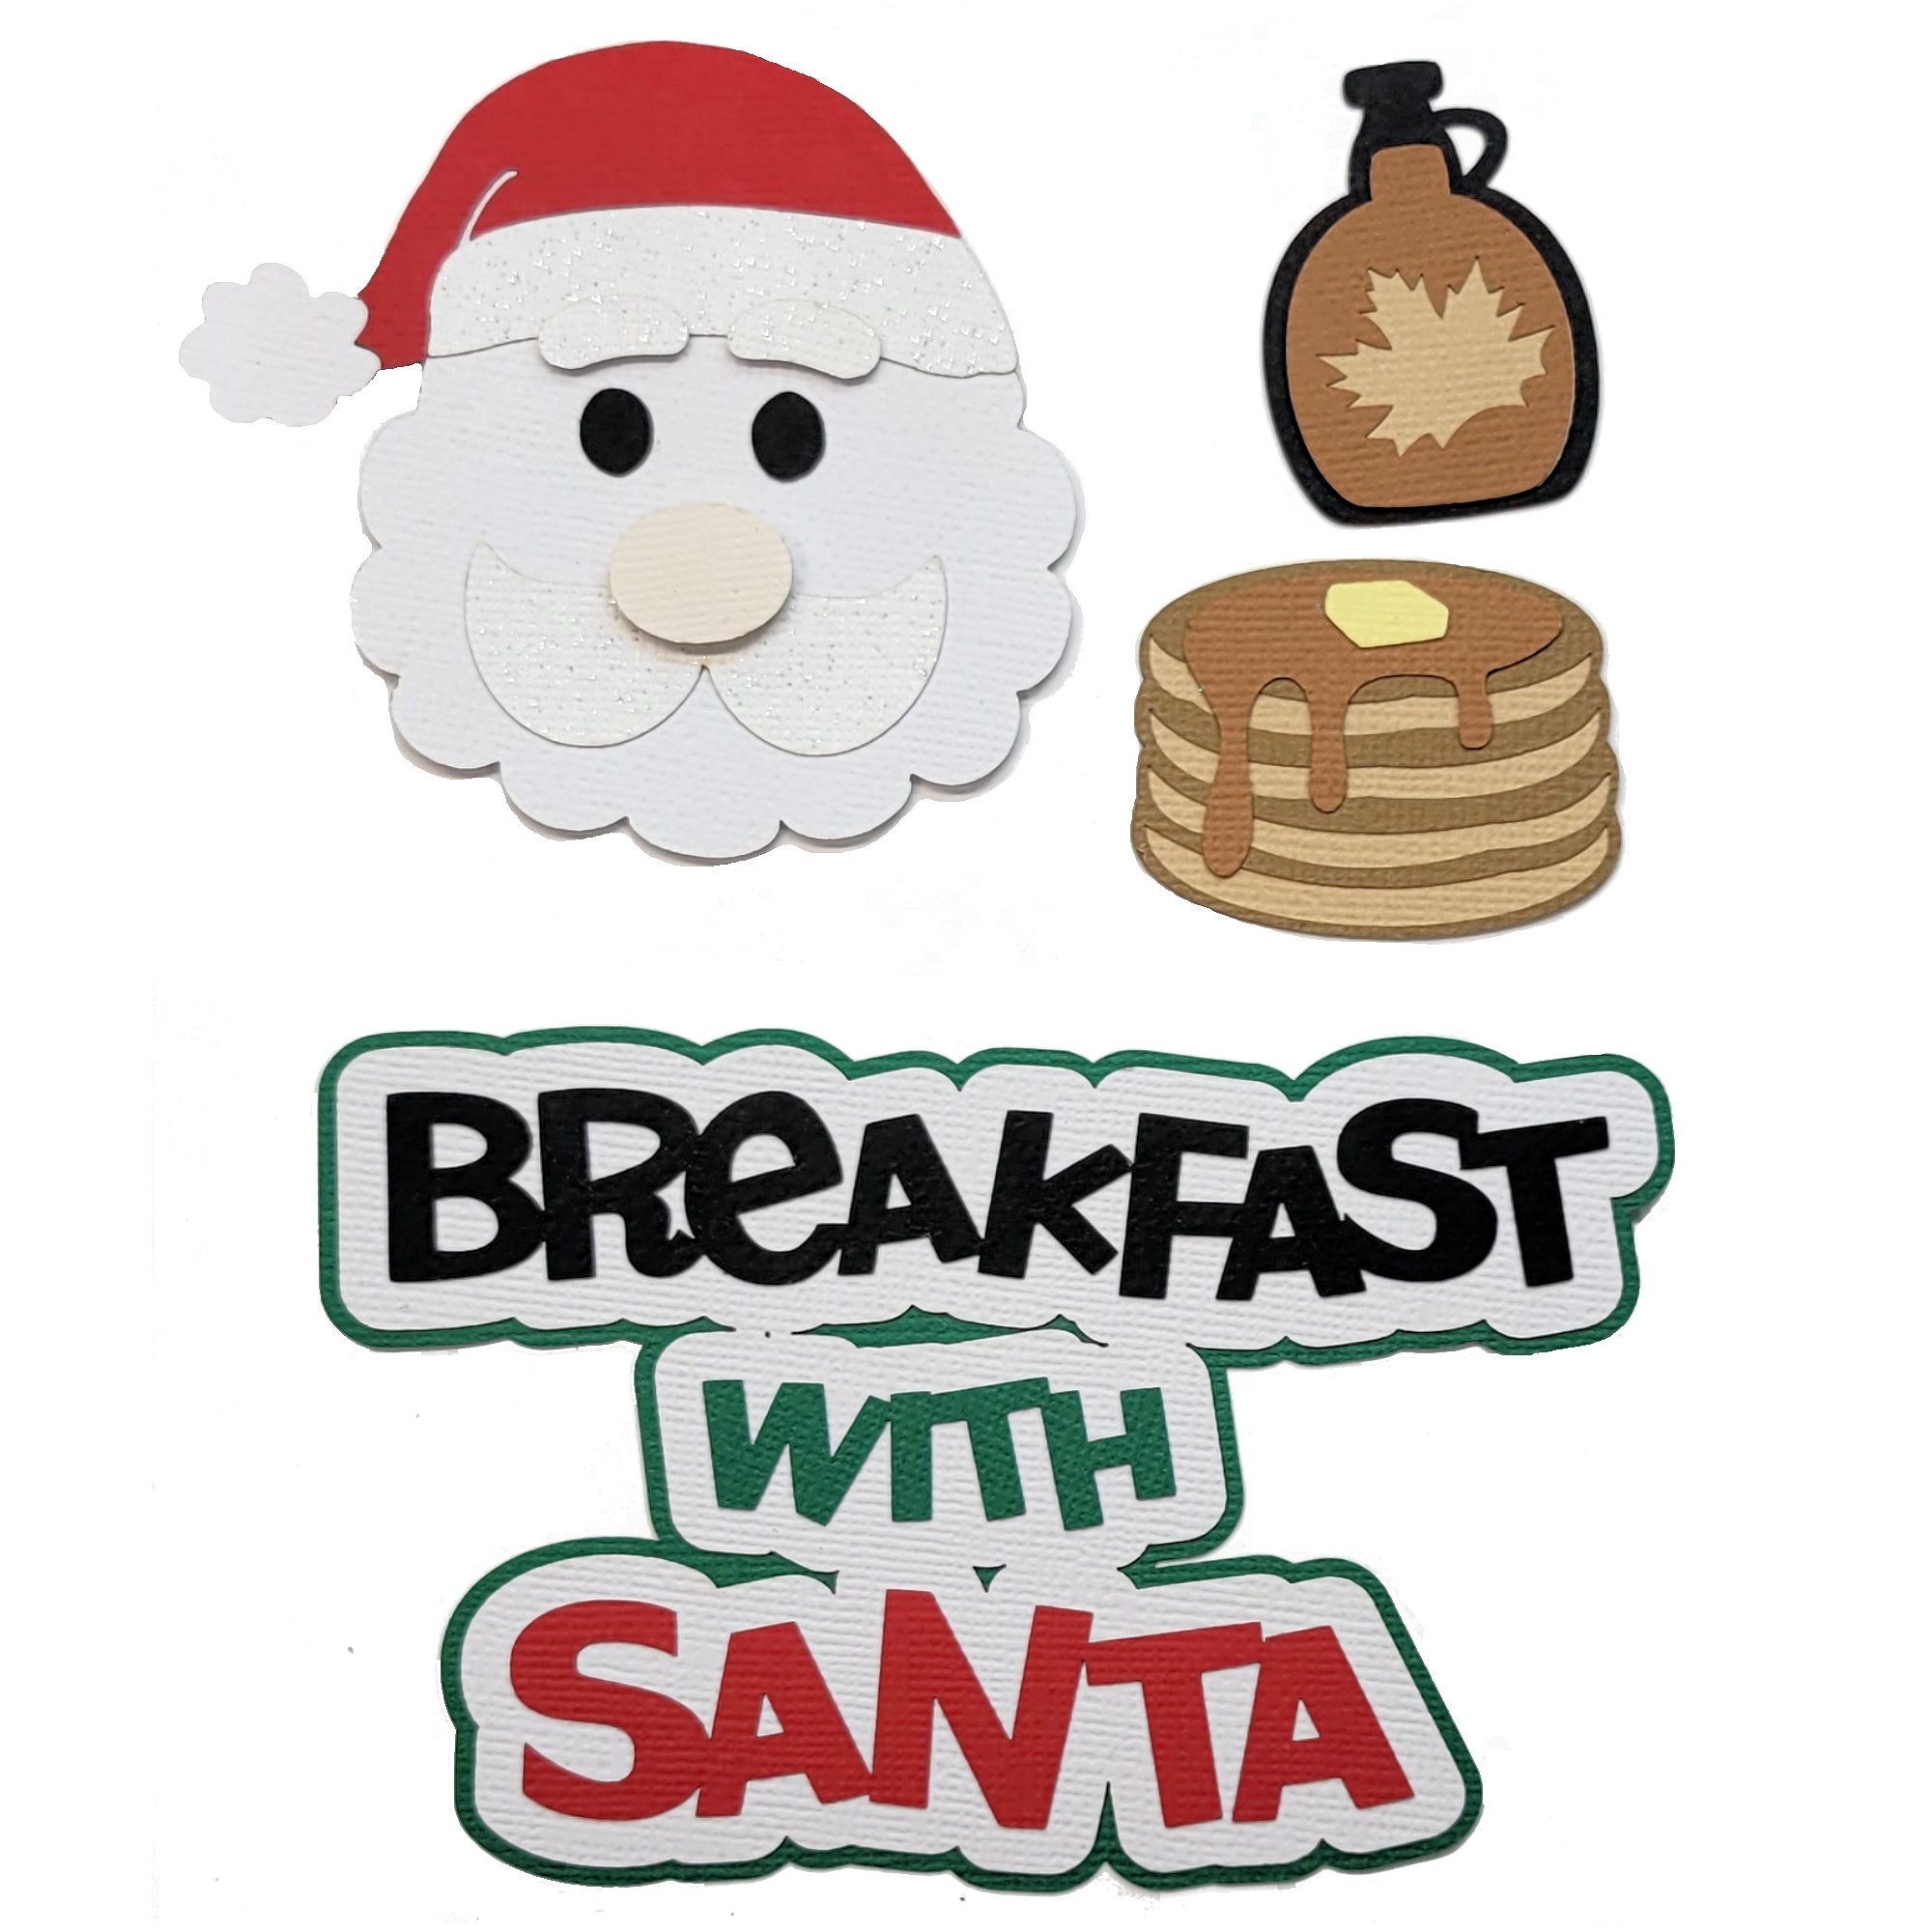 Breakfast With Santa Title 4.75 x 3.25 Fully-Assembled Laser Cut Scrapbook Embellishment by SSC Laser Designs